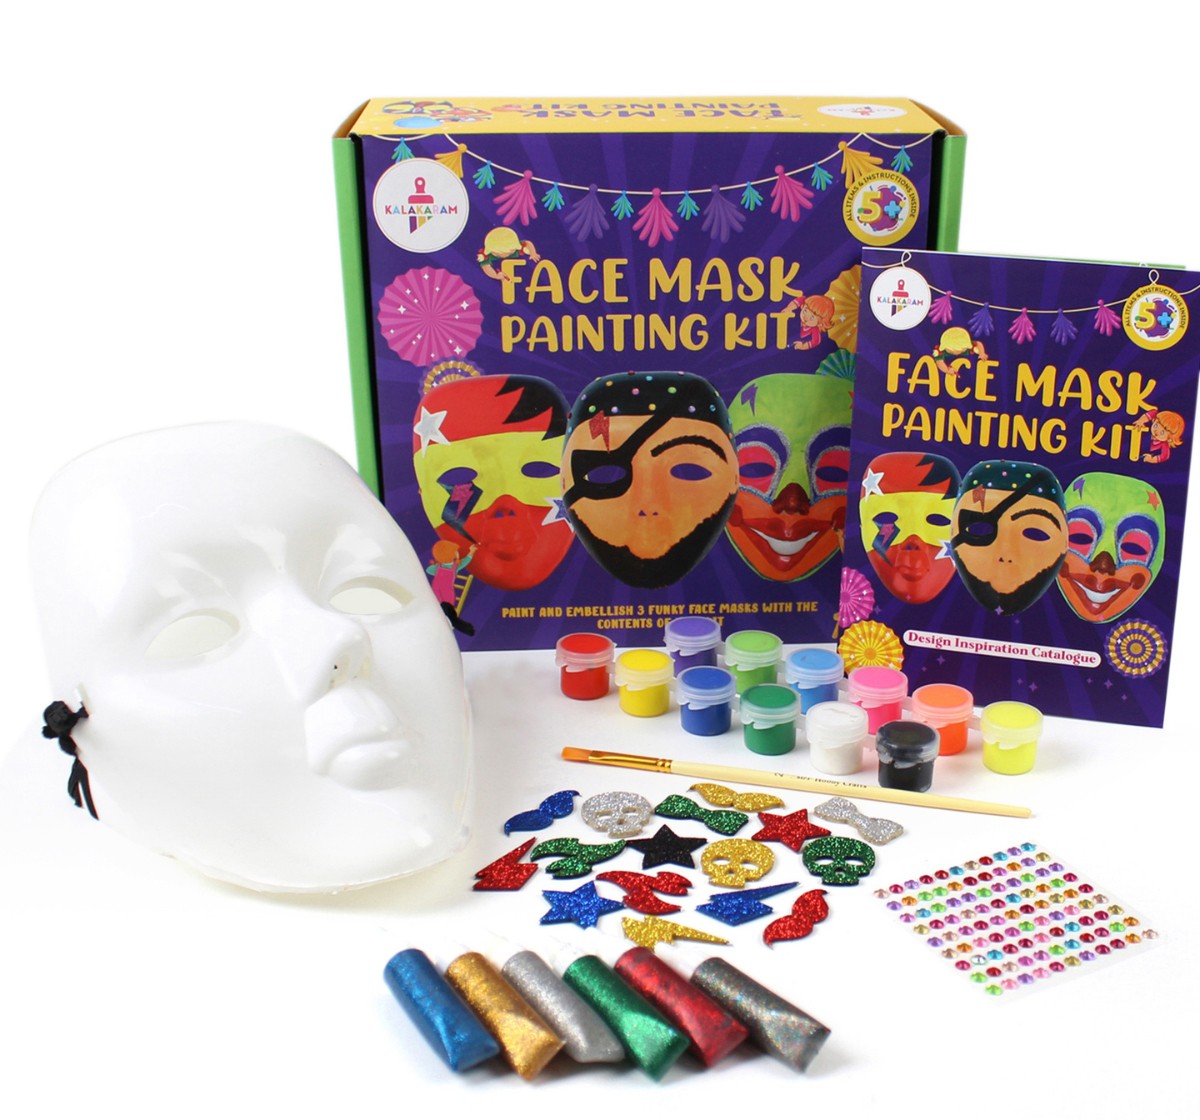 Kalakaram DIY Face Mask Painting Kit for Kids, Paint your Own Party mask with Content of this Kit, DIY Painting Kit for Kids, 5Y+, Multicolour